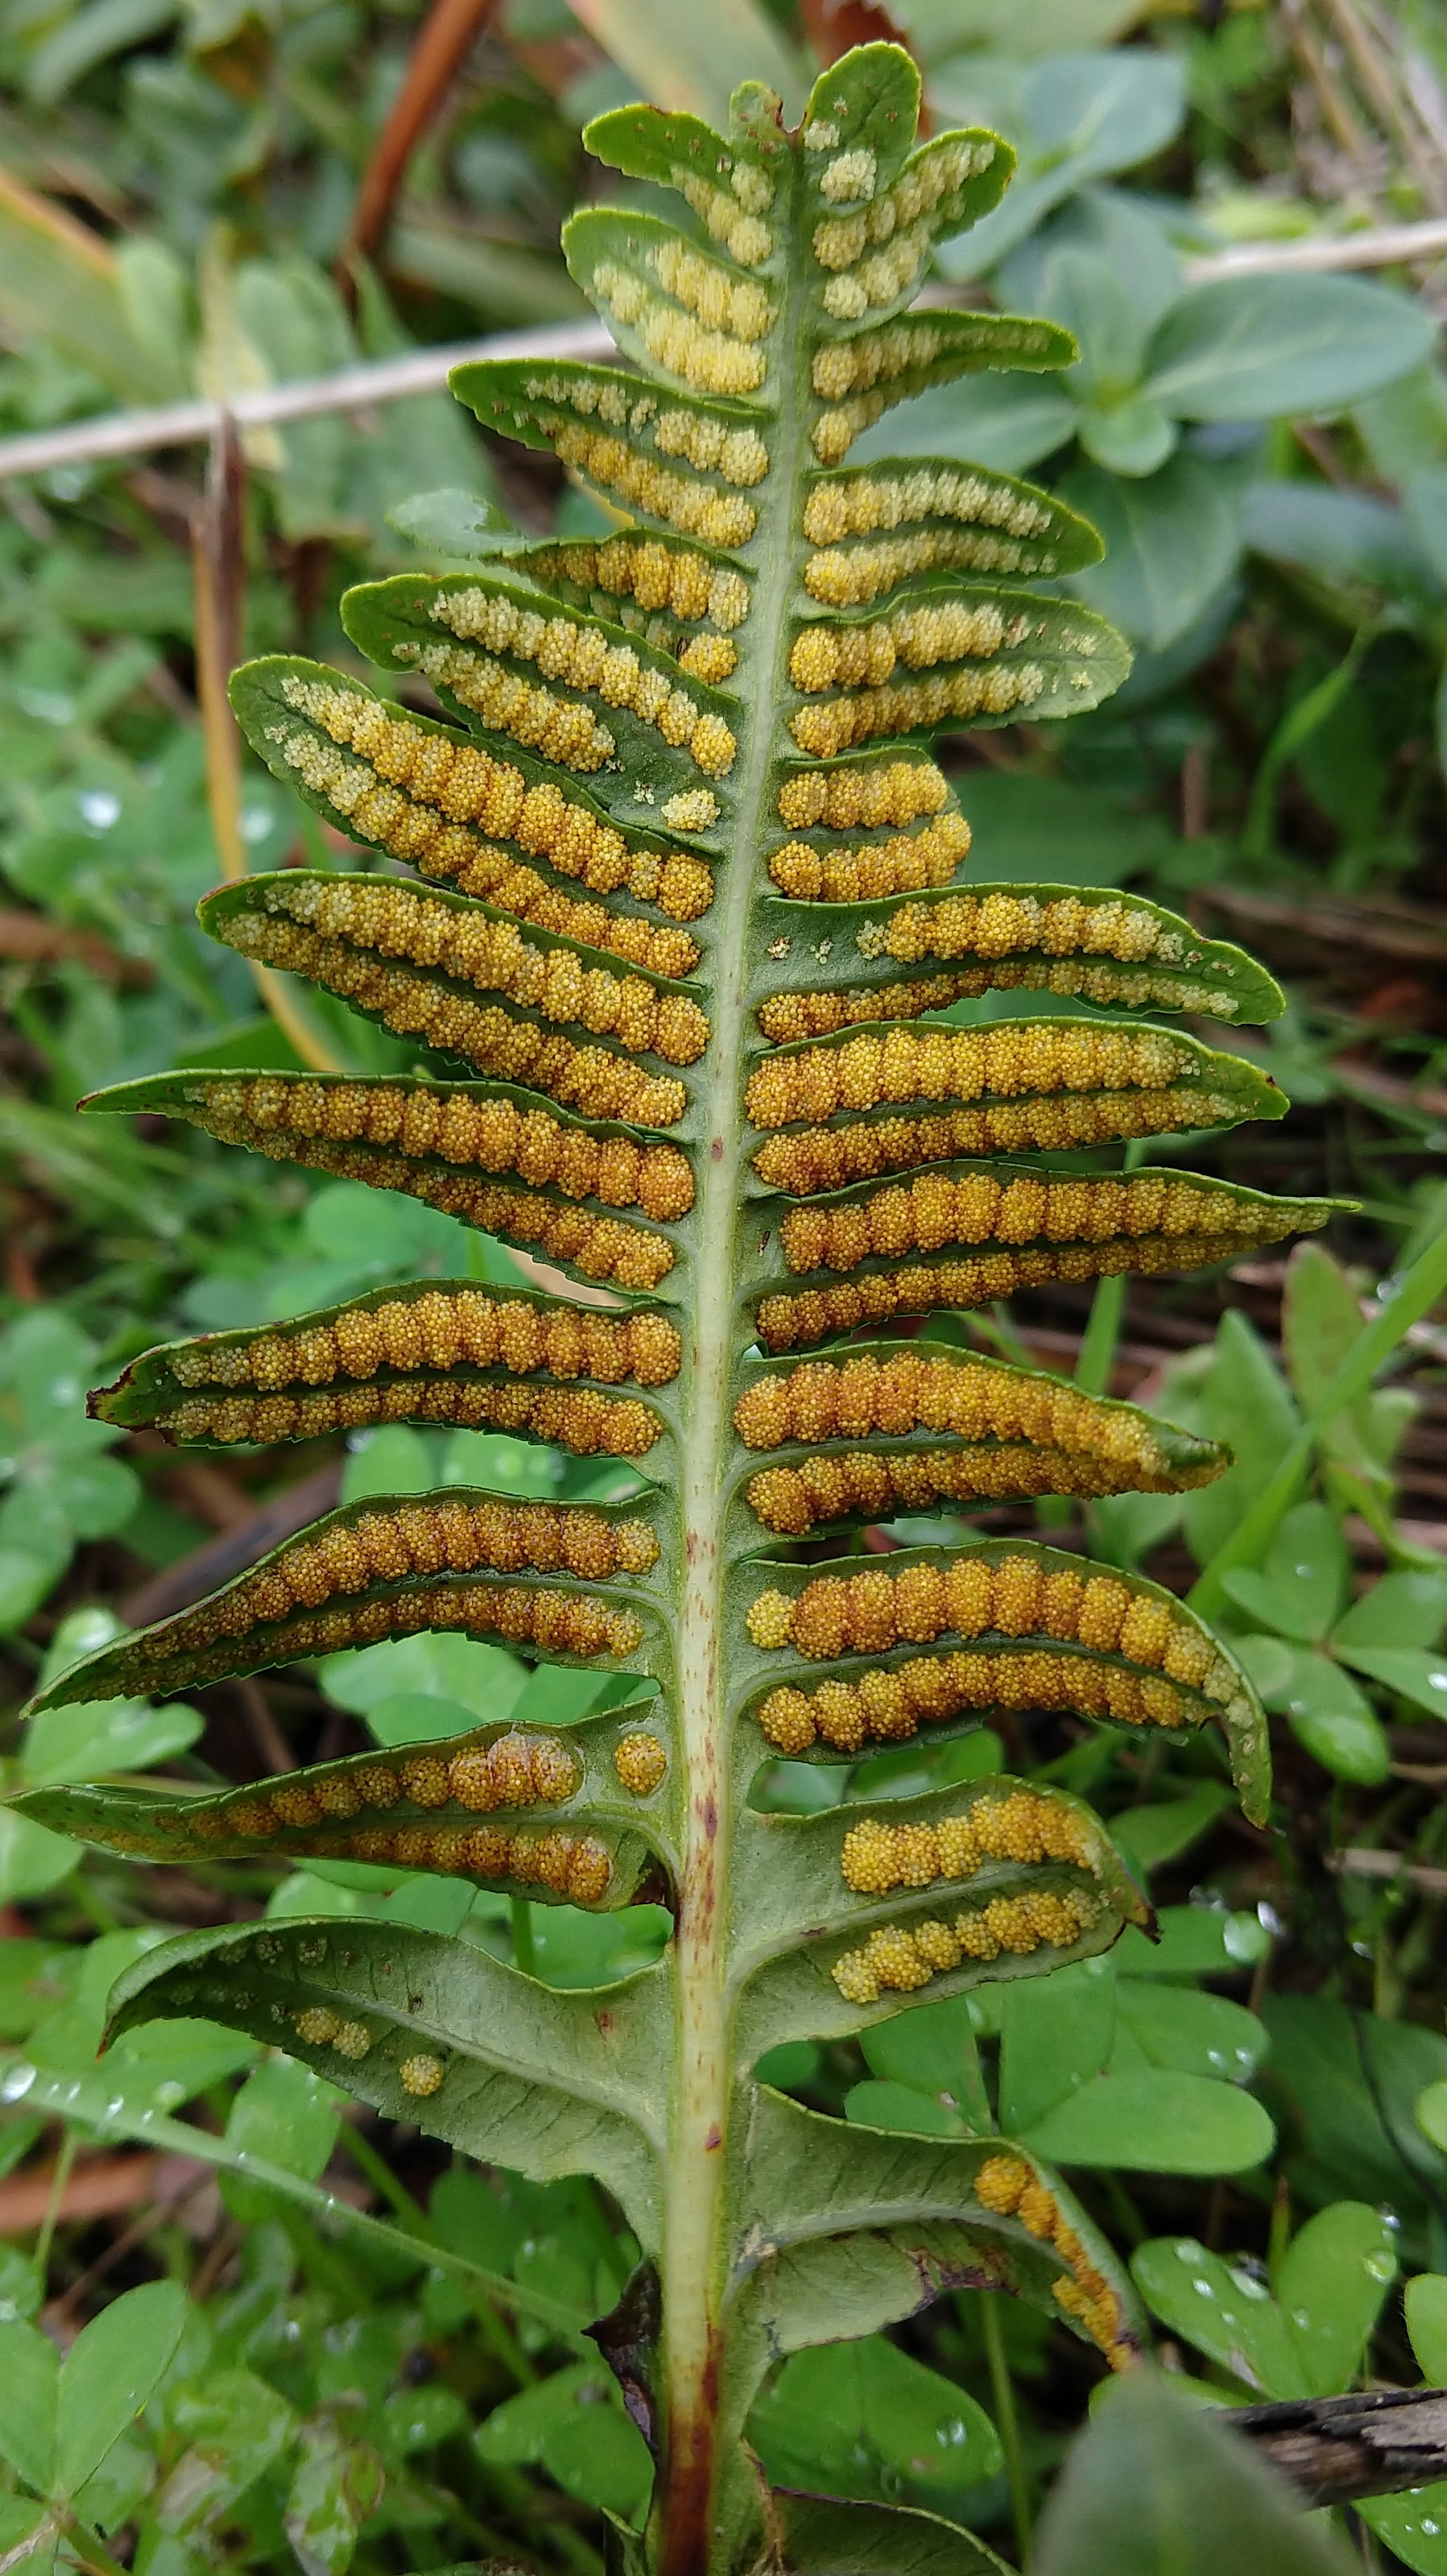 A fern frond where each pinna has two rows of fuzzy-looking orange lumps (sori)